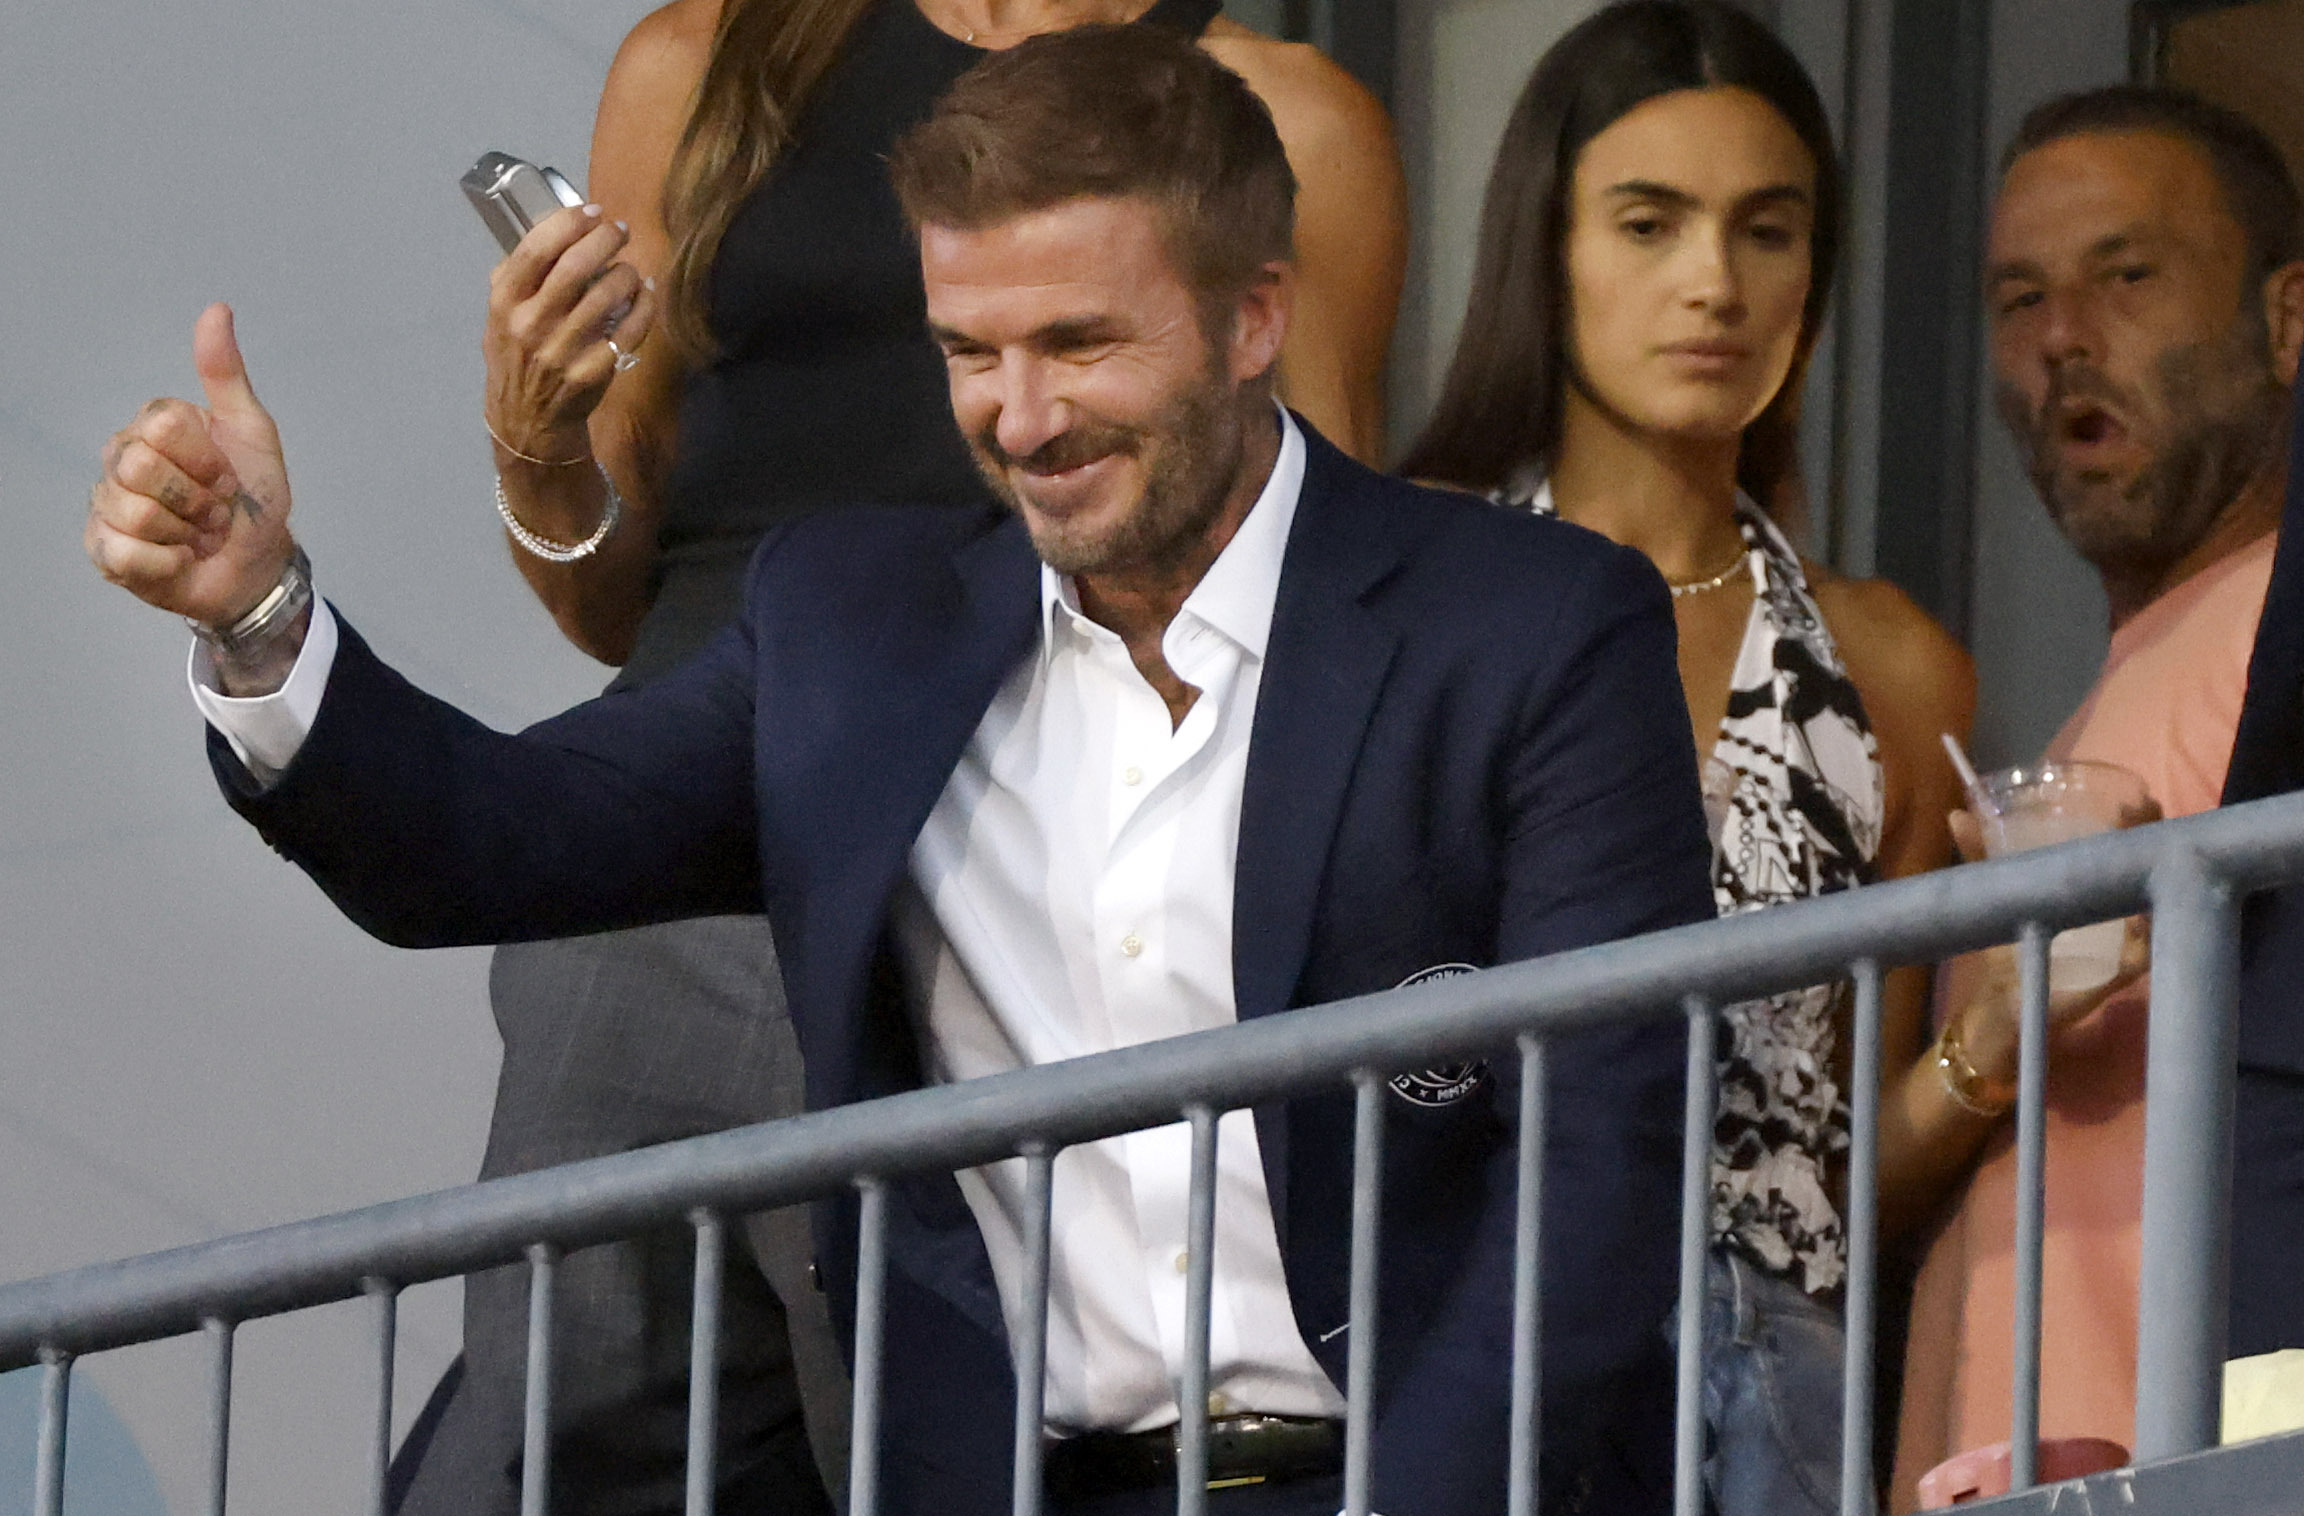 David Beckham and Victoria Beckham visited this Dallas barbecue joint for  brisket